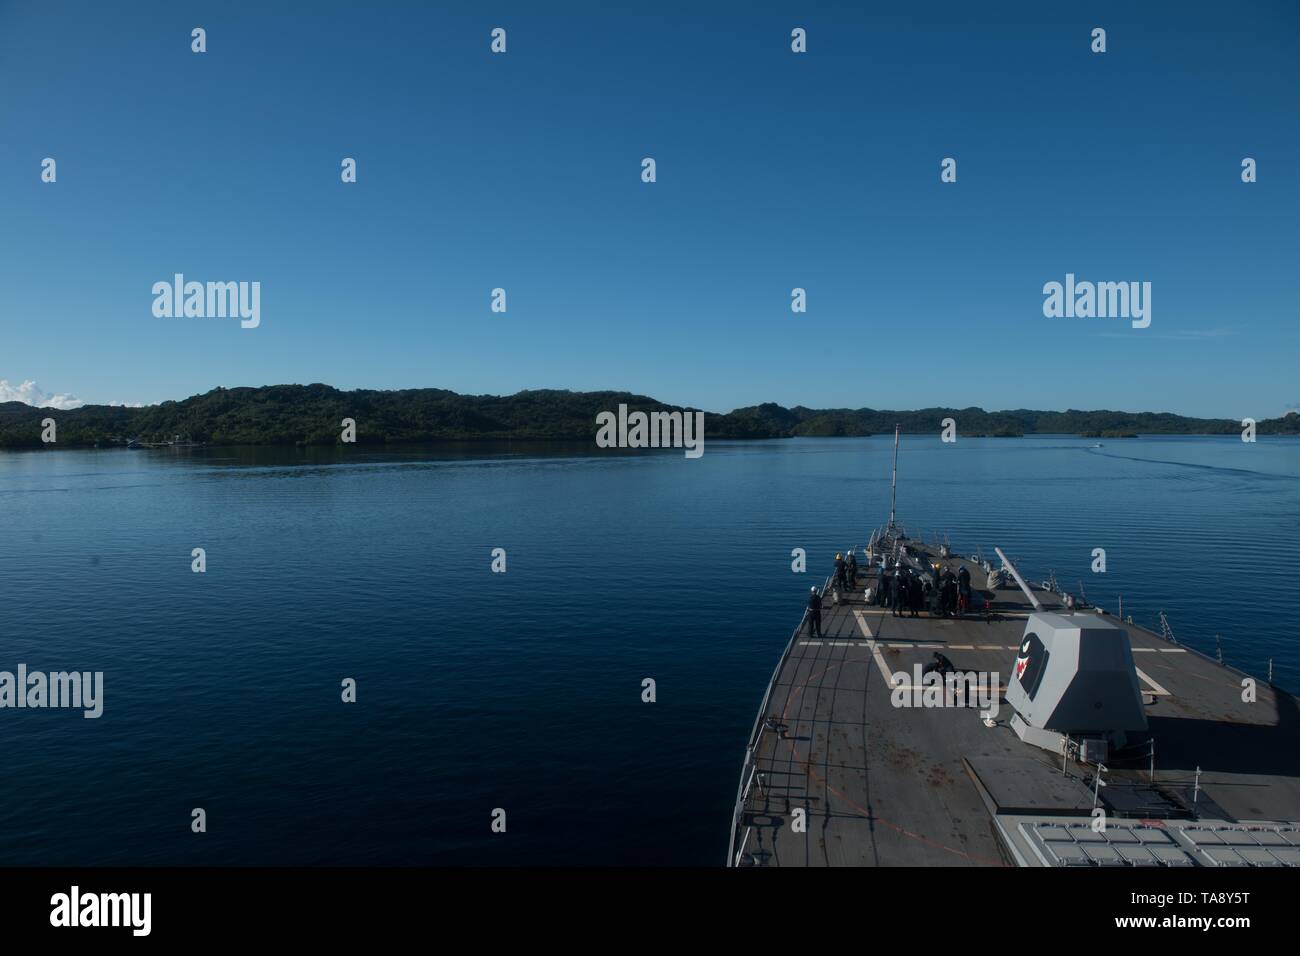 190515-N-OW019-1006 PALAU (May 15, 2019) The guided-missile destroyer USS Chung-Hoon (DDG 93) sails towards Palau to conduct a port visit. Chung-Hoon is deployed to the U.S. 7th Fleet area of operations in support of security and stability in the Indo-Pacific region. (U.S. Navy photo by Mass Communication Specialist 2nd Class Logan C. Kellums) Stock Photo